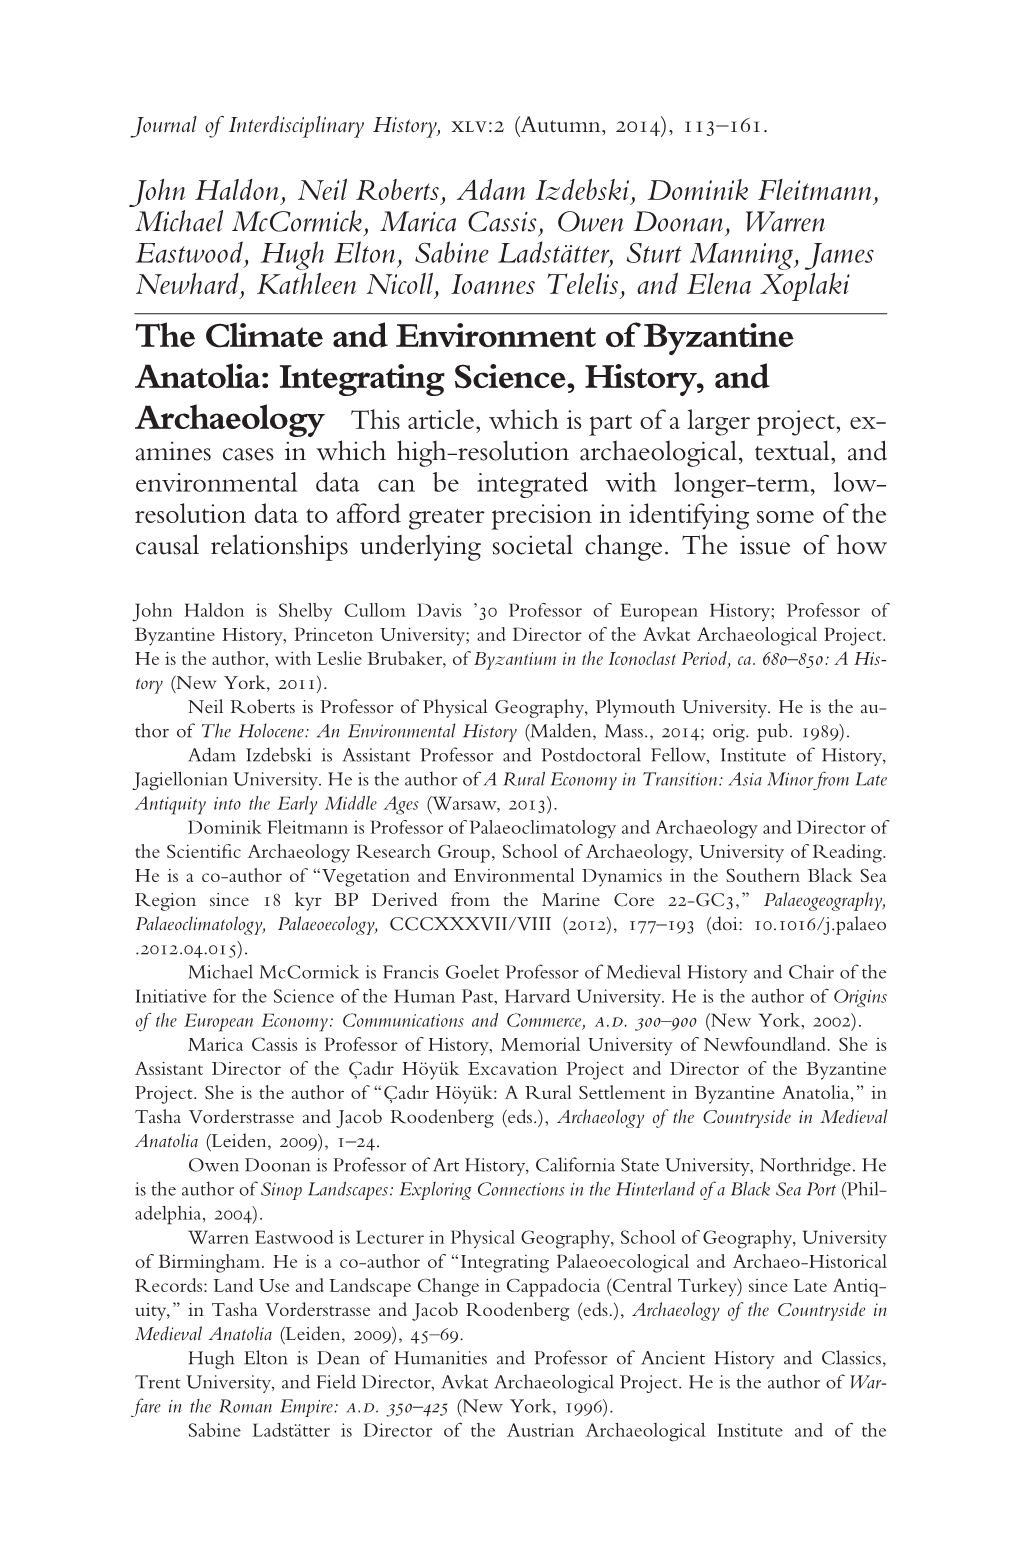 The Climate and Environment of Byzantine Anatolia: Integrating